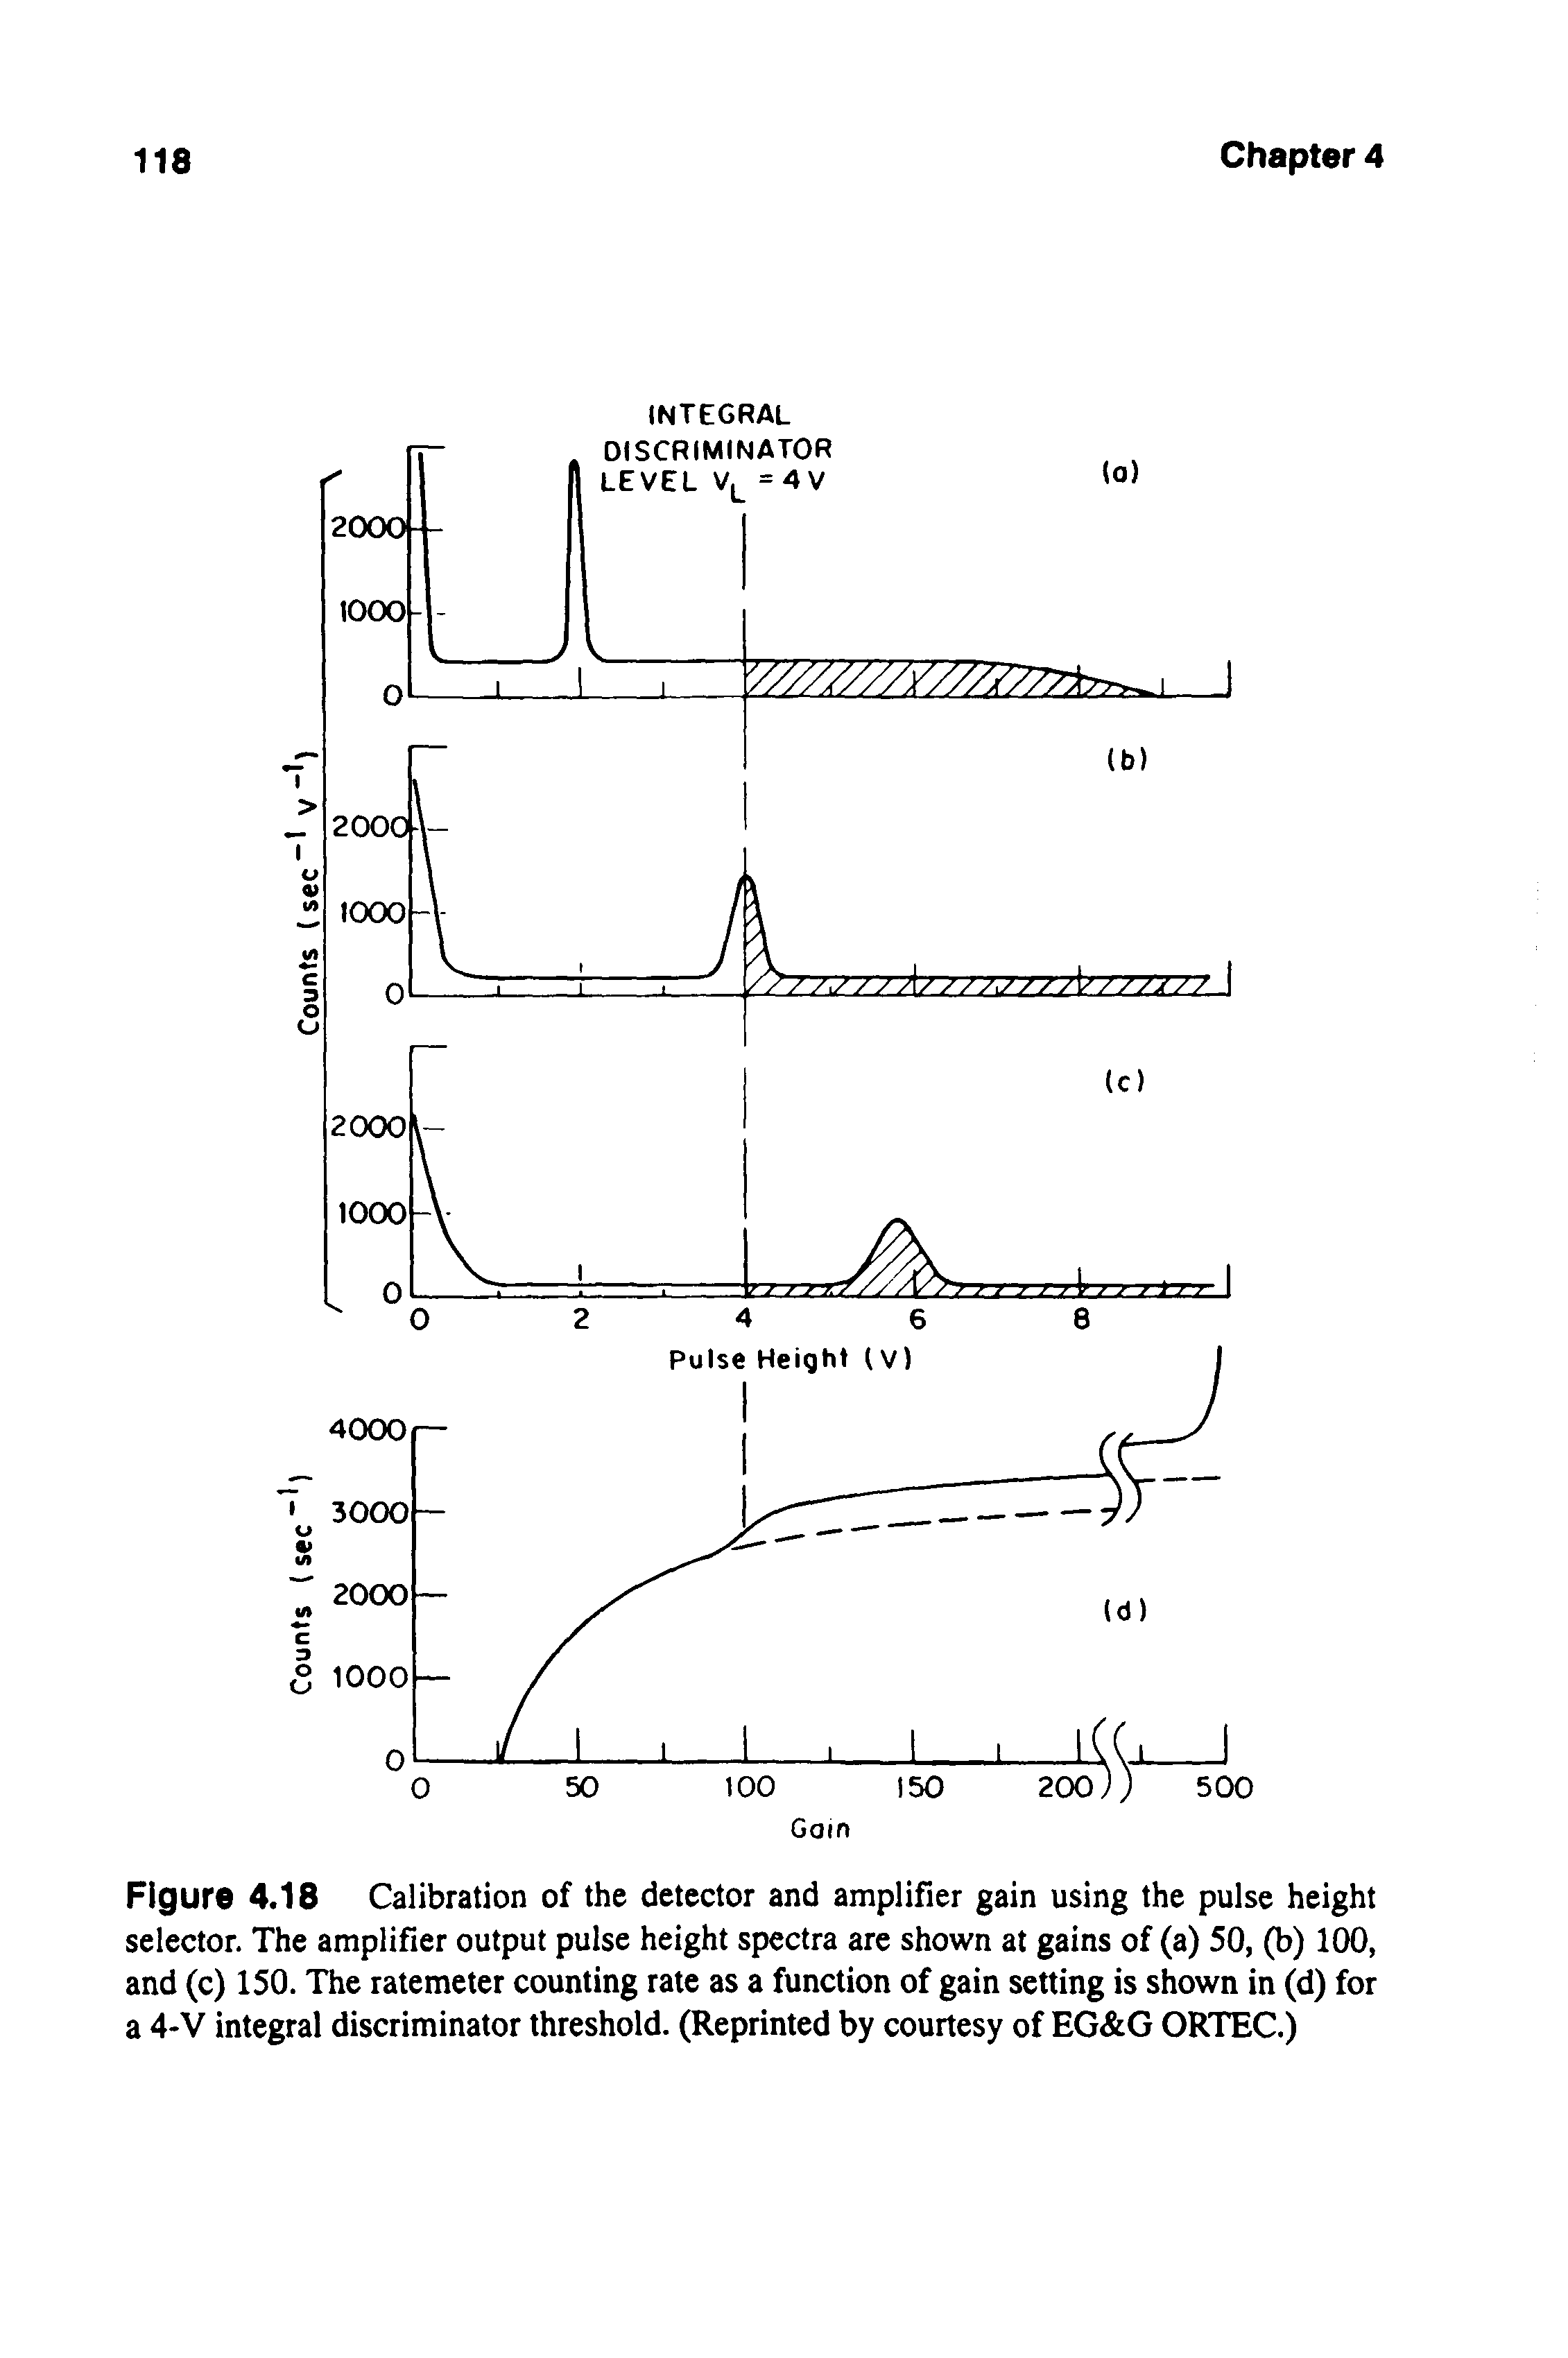 Figure 4.18 Calibration of the detector and amplifier gain using the pulse height selector. The amplifier output pulse height spectra are shown at gains of (a) 50, (b) 100, and (c) 150. The ratemeter counting rate as a function of gain setting is shown in (d) for a 4-V integral discriminator threshold. (Reprinted by courtesy of EG G ORTEC.)...